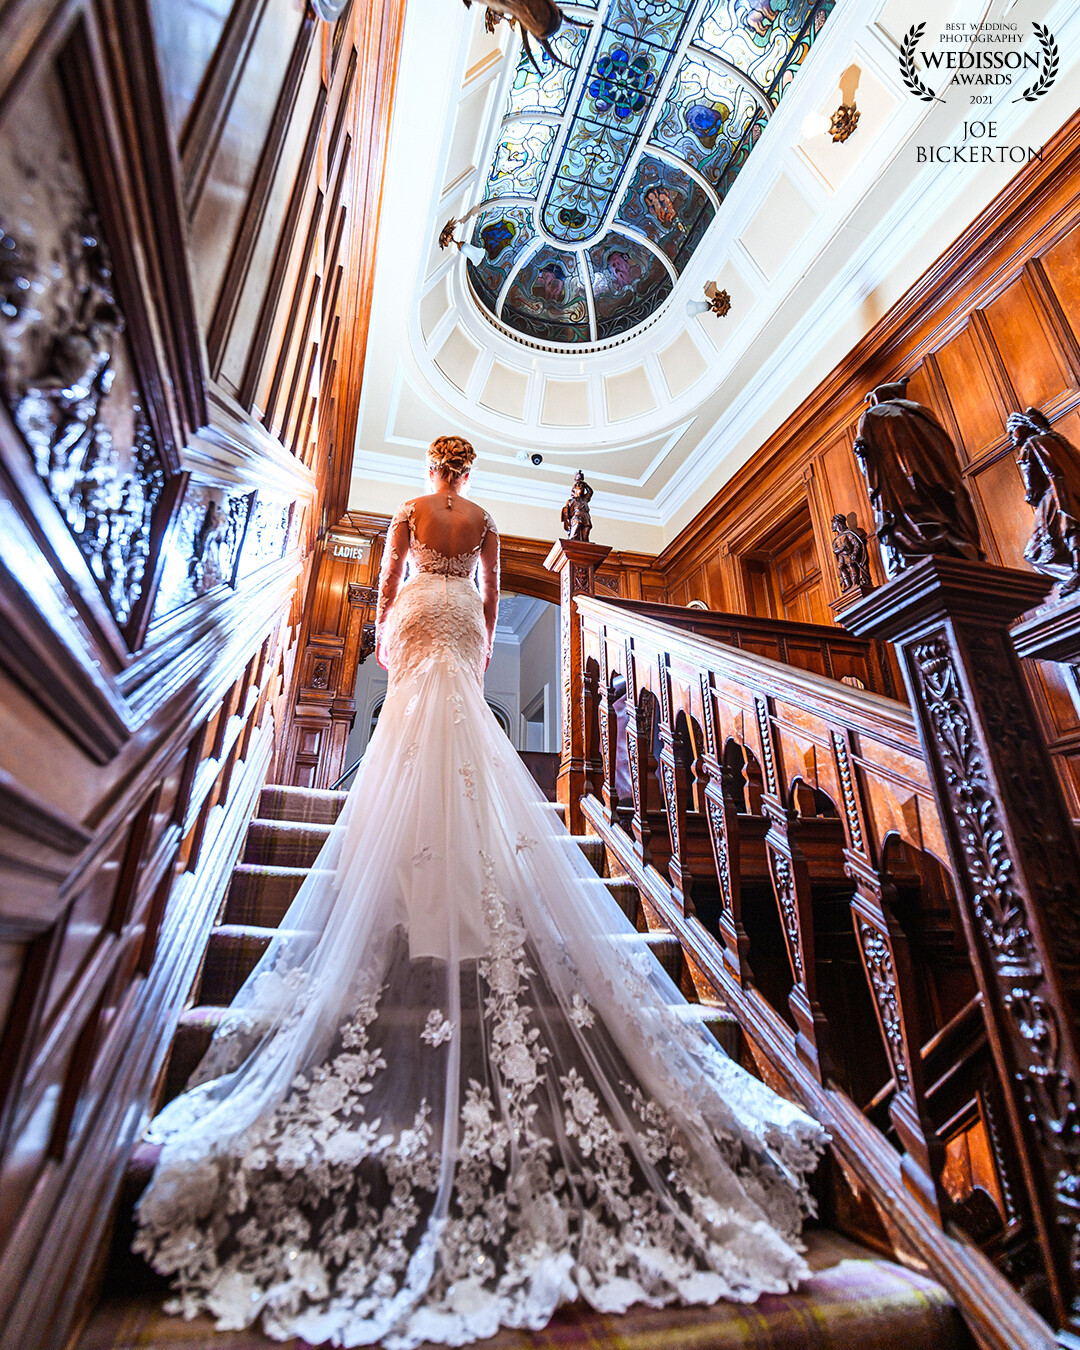 This staircase at Thornton Hall always lends itself to a 15mm wide shot.  Rachel was lit with an OCF light set at 1/64 in front of her, with a second OCF to my right at 1/128 lighting the back of the dress.  The 15mm lens was used to capture the ornate skylight and capture the flowing lines of the staircase too. Thanks for the award Wedisson!